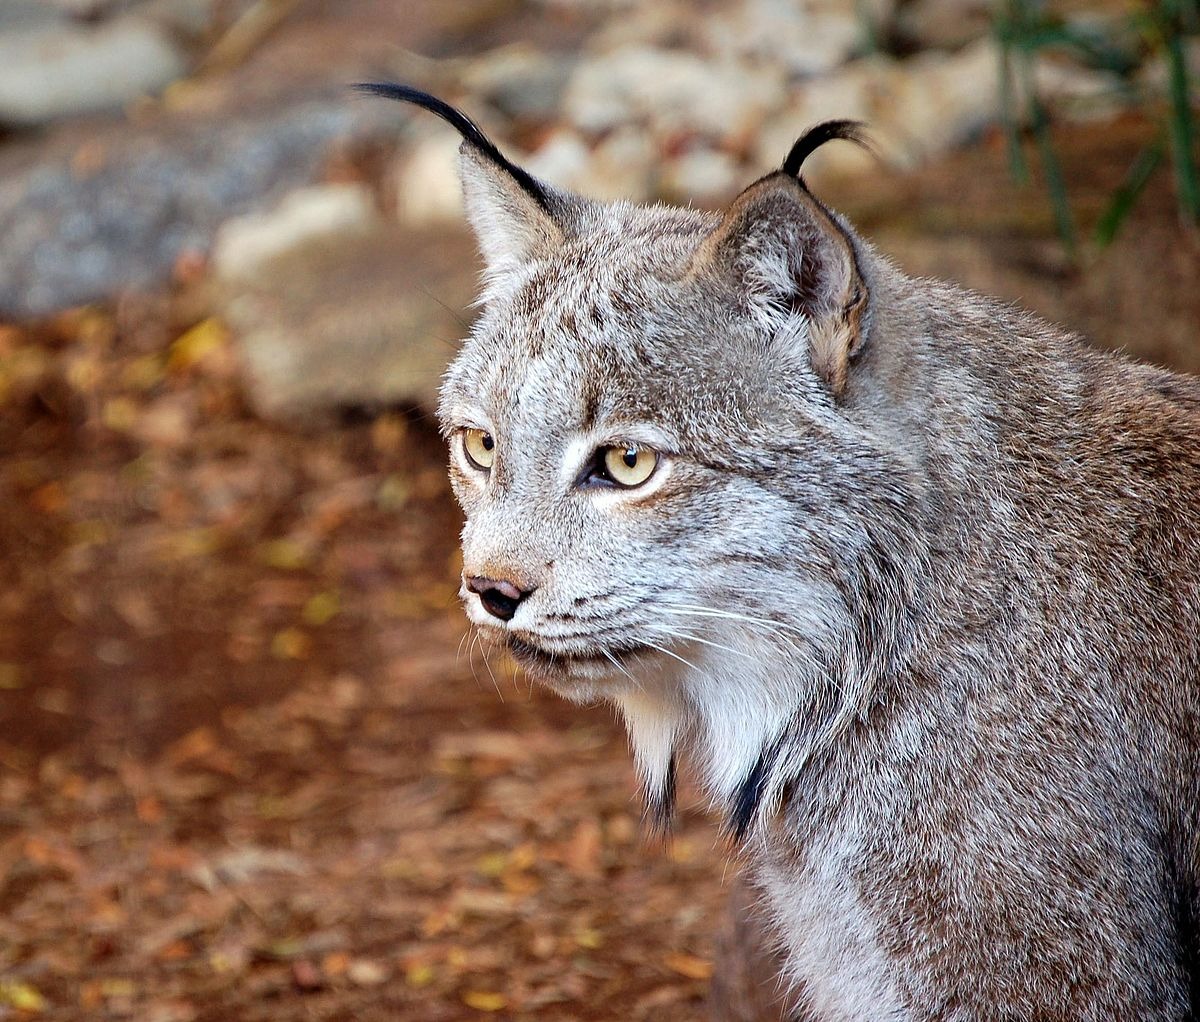 🐒 If You Can Answer 18 of These 24 Animal Questions Correctly, You Likely Know More Than Most People Canadian lynx